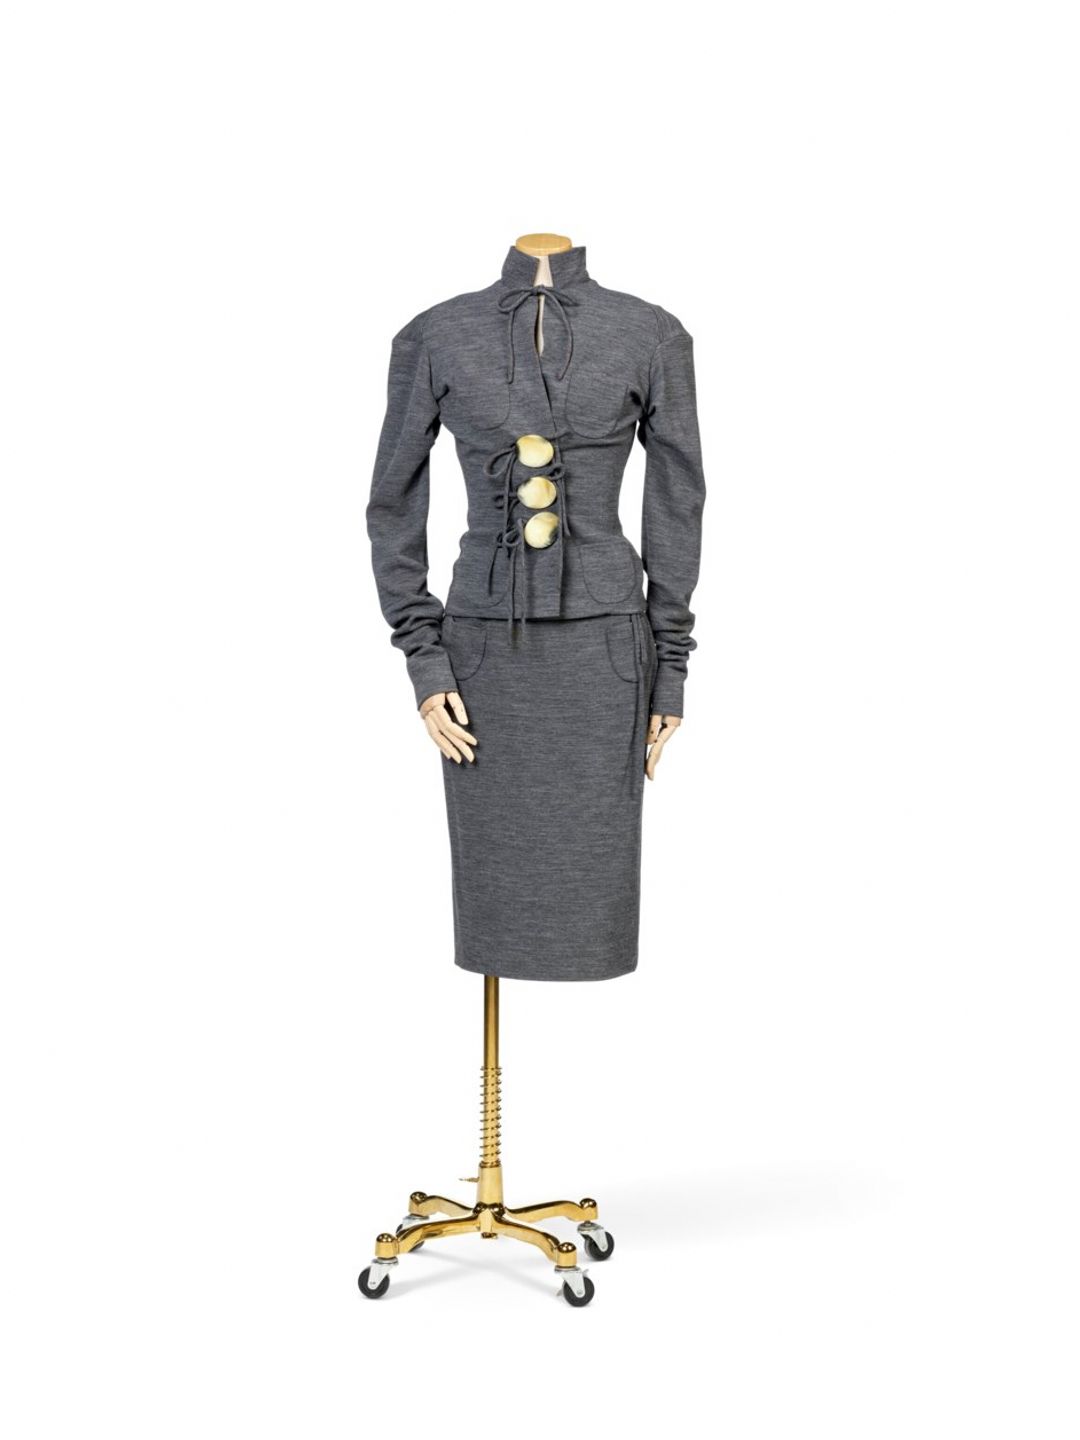 This two-piece suit from Vivienne Westwood's archive is one of the many outfits up for auction that was once owned by the late designer